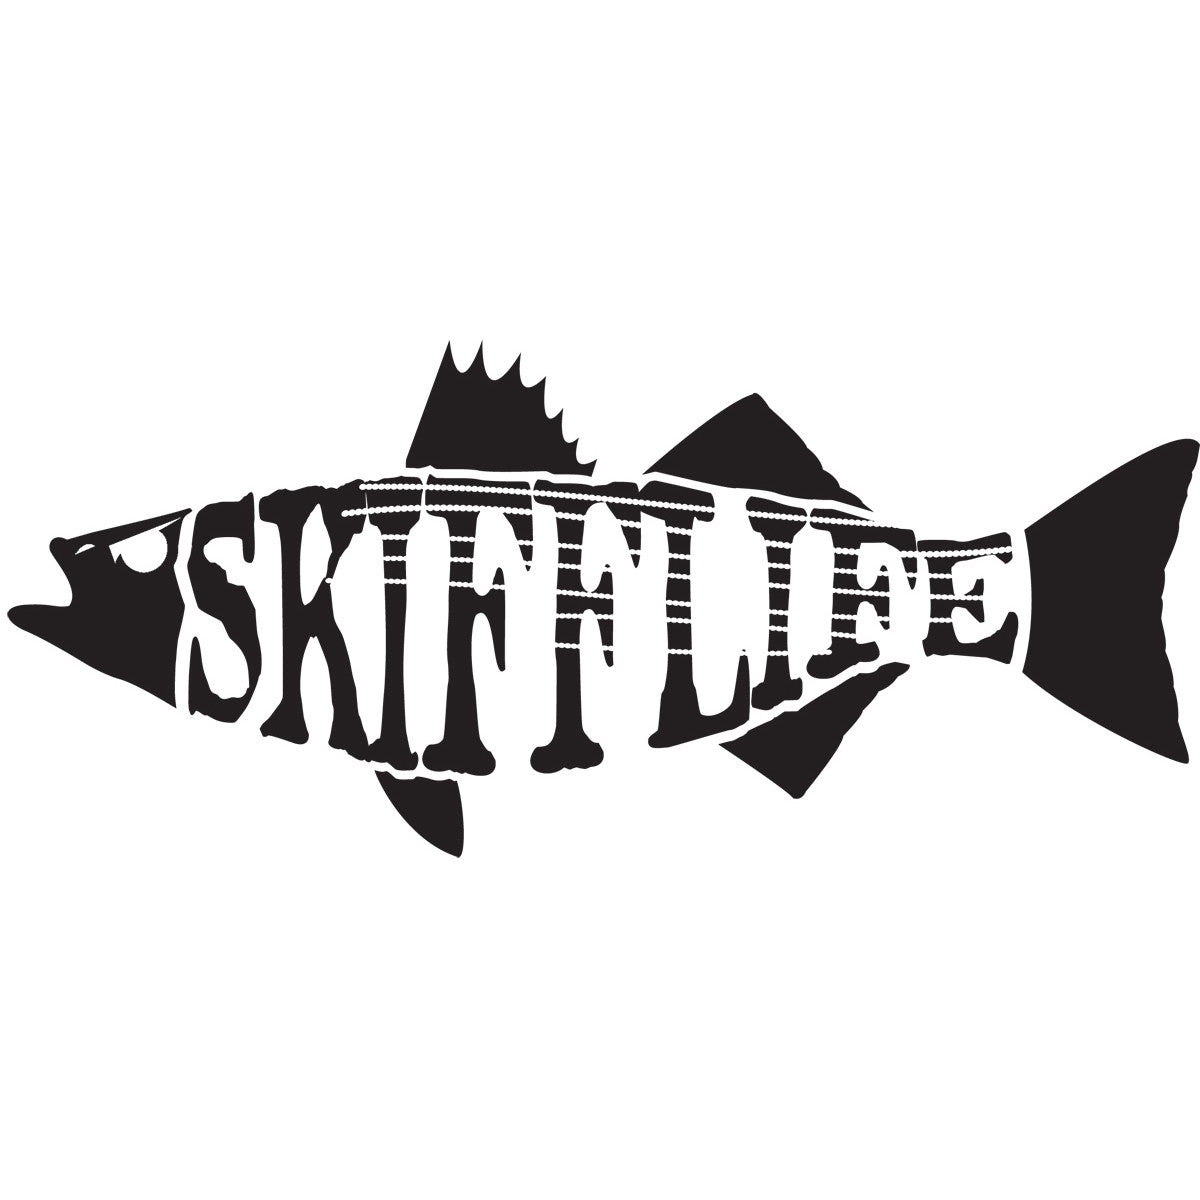 Striped Bass Fishing Decal by Skiff Life - Skiff Life